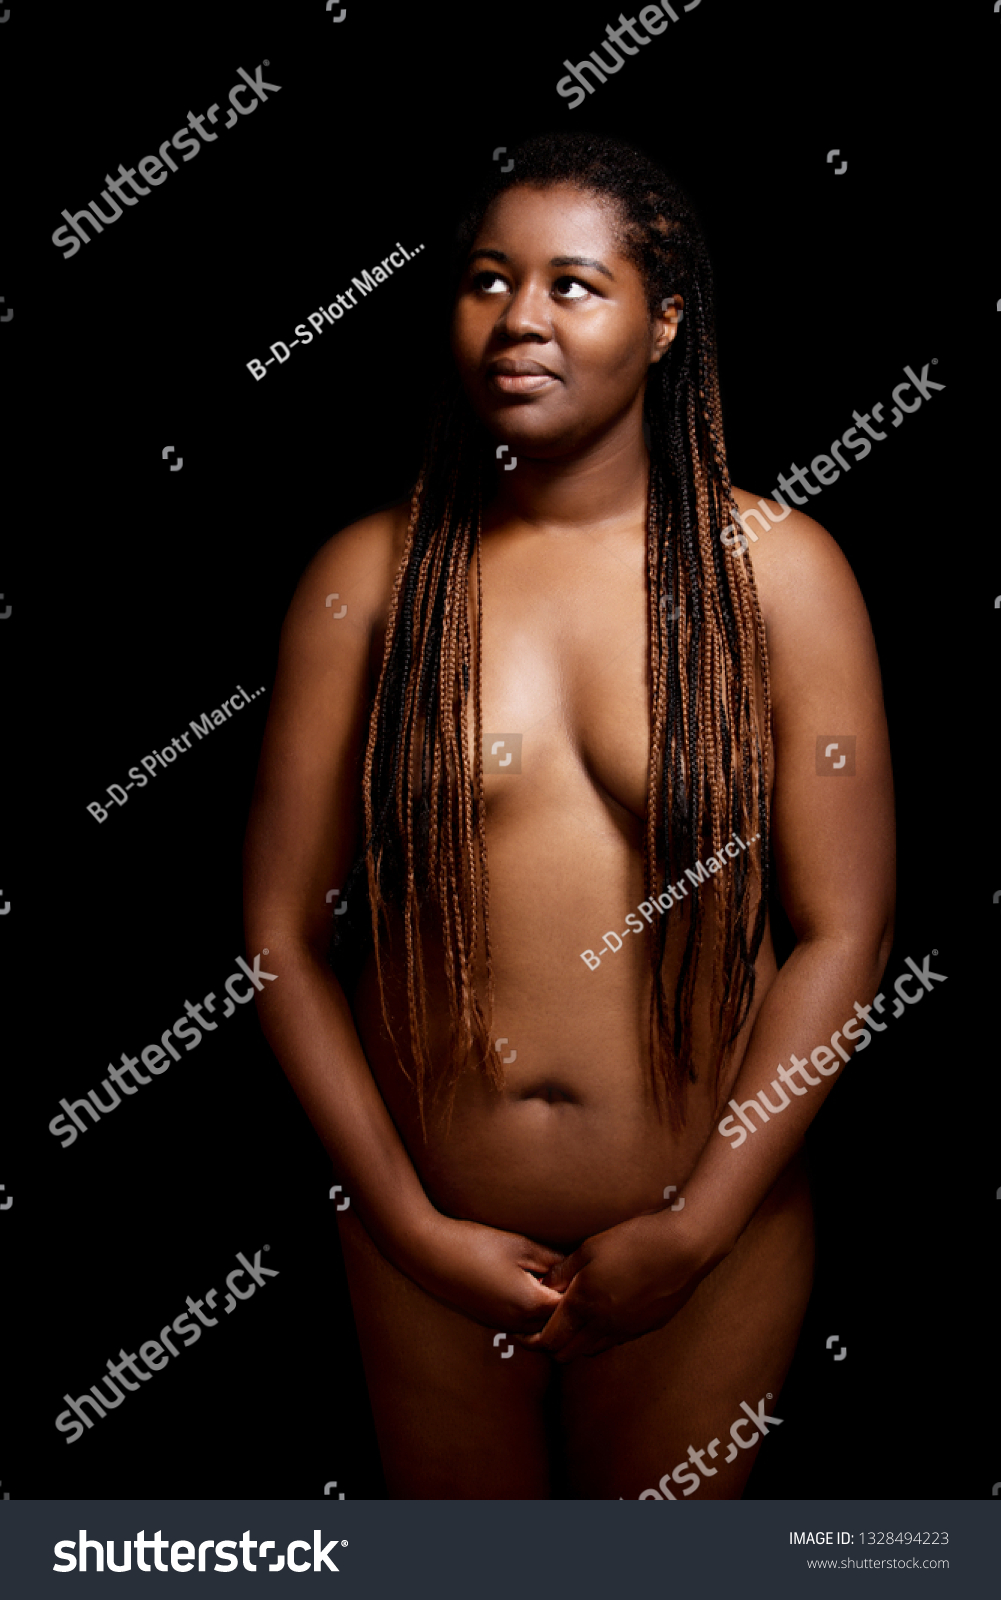 African Nude Picture Woman